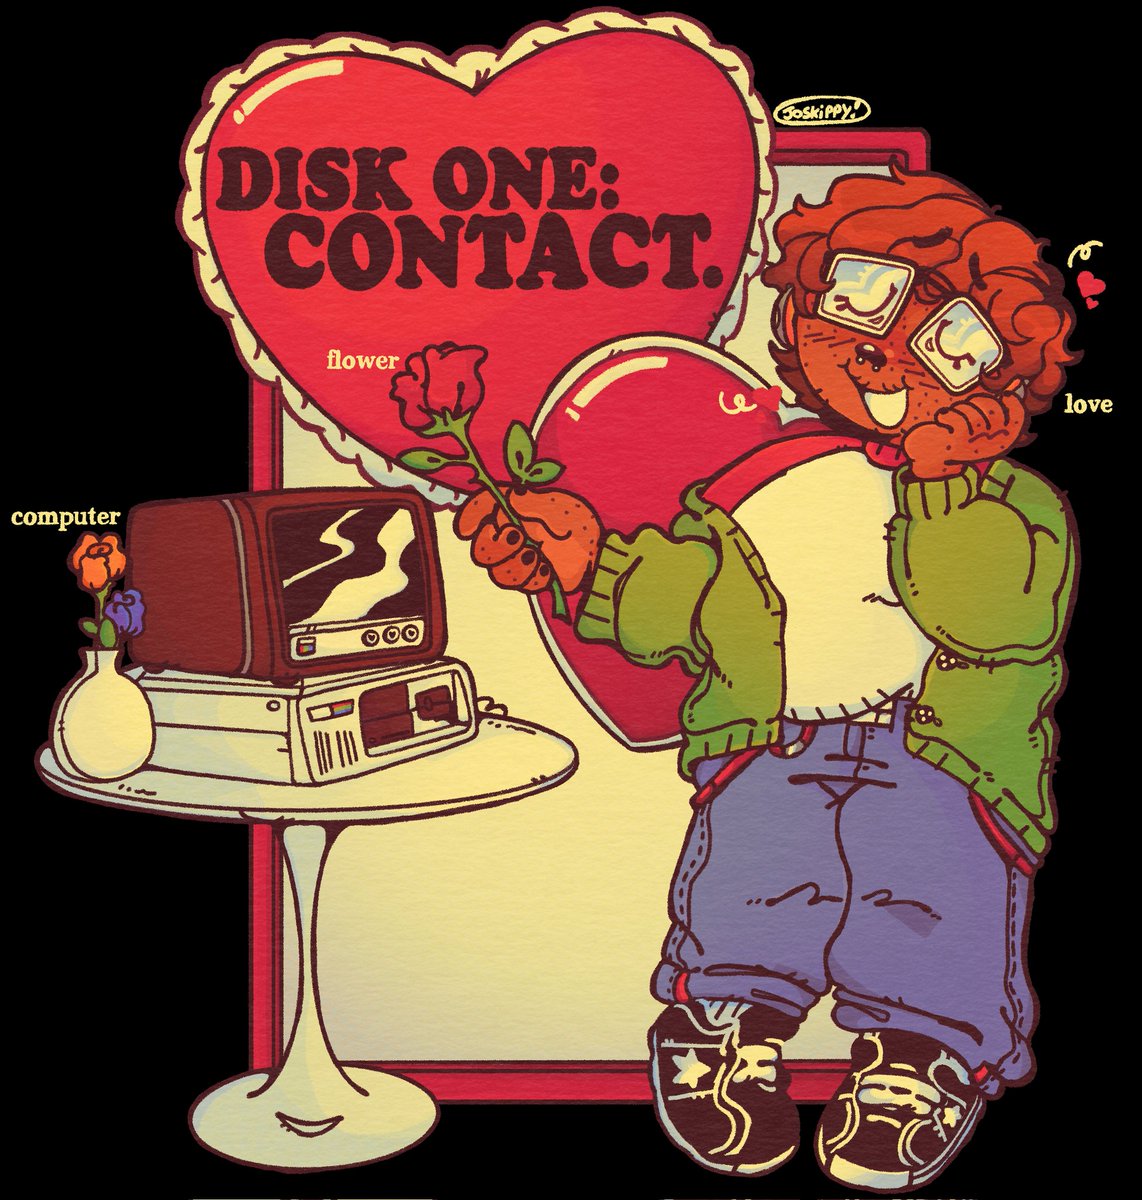 DISK ONE: CONTACT